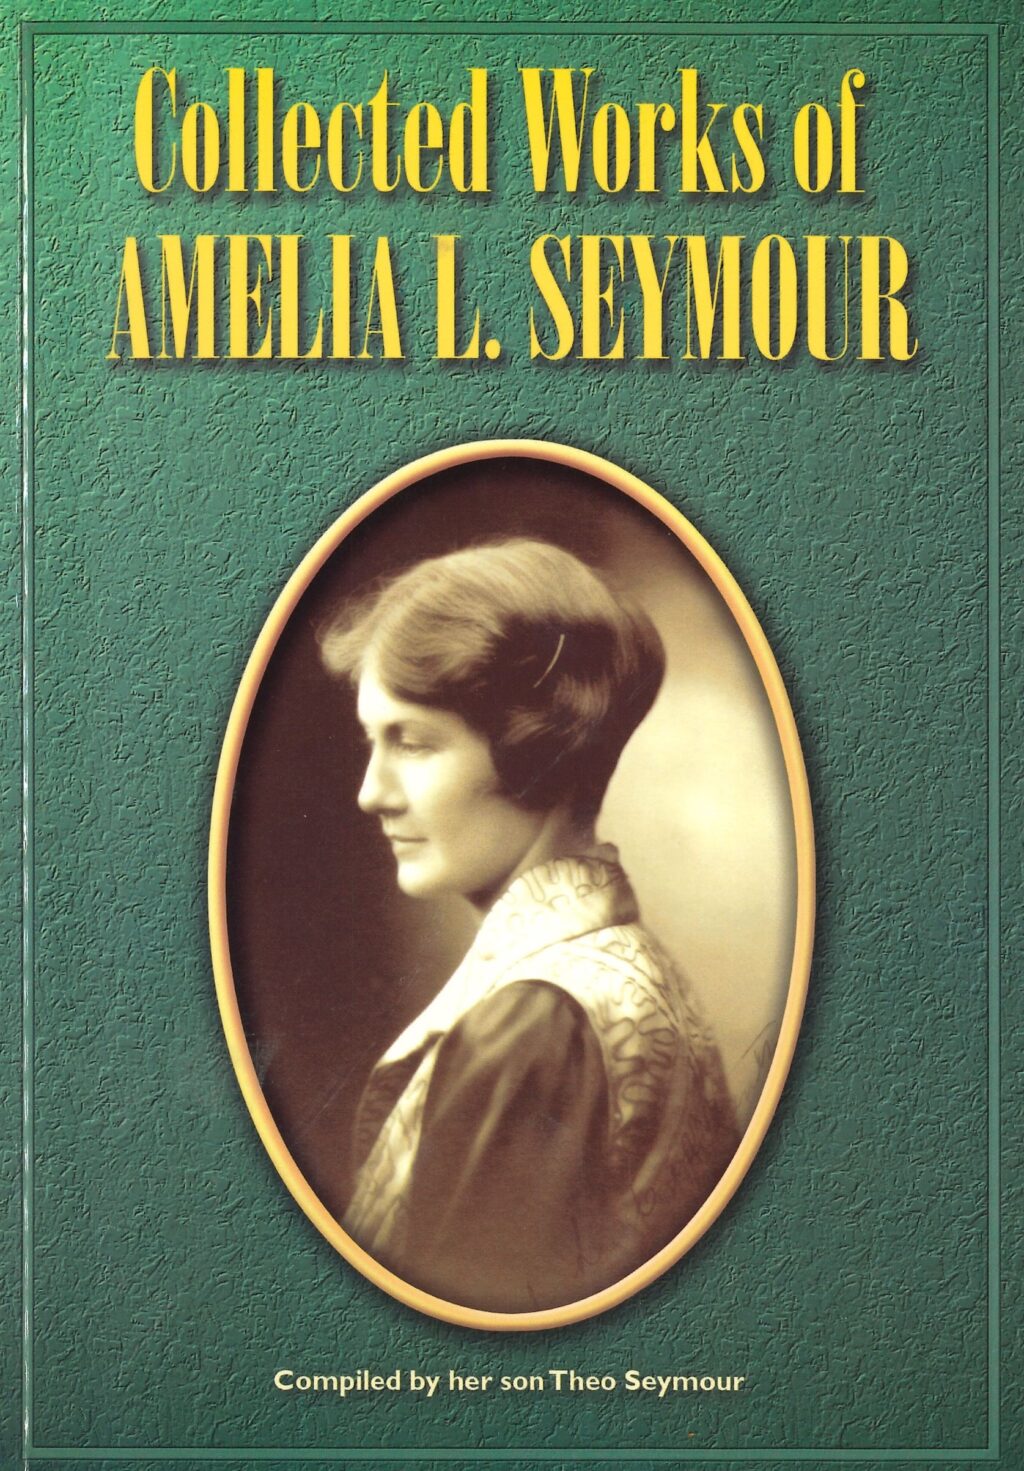 Collected Works of Amelia L. Seymour